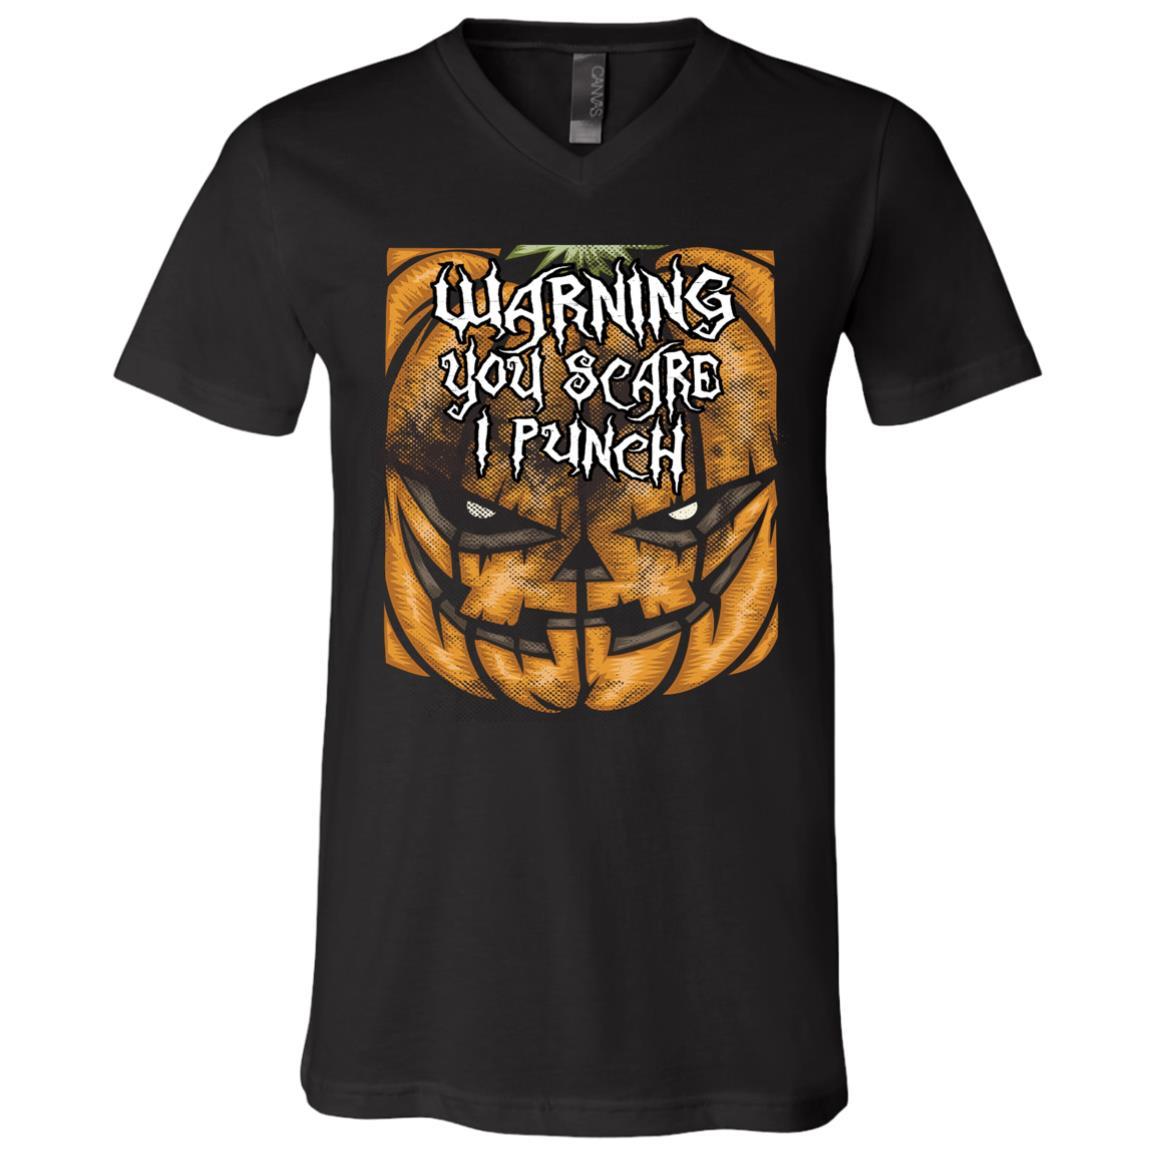 Funny Shirt Halloween You Scare I Punch Unisex Tees - GoneBold.gift